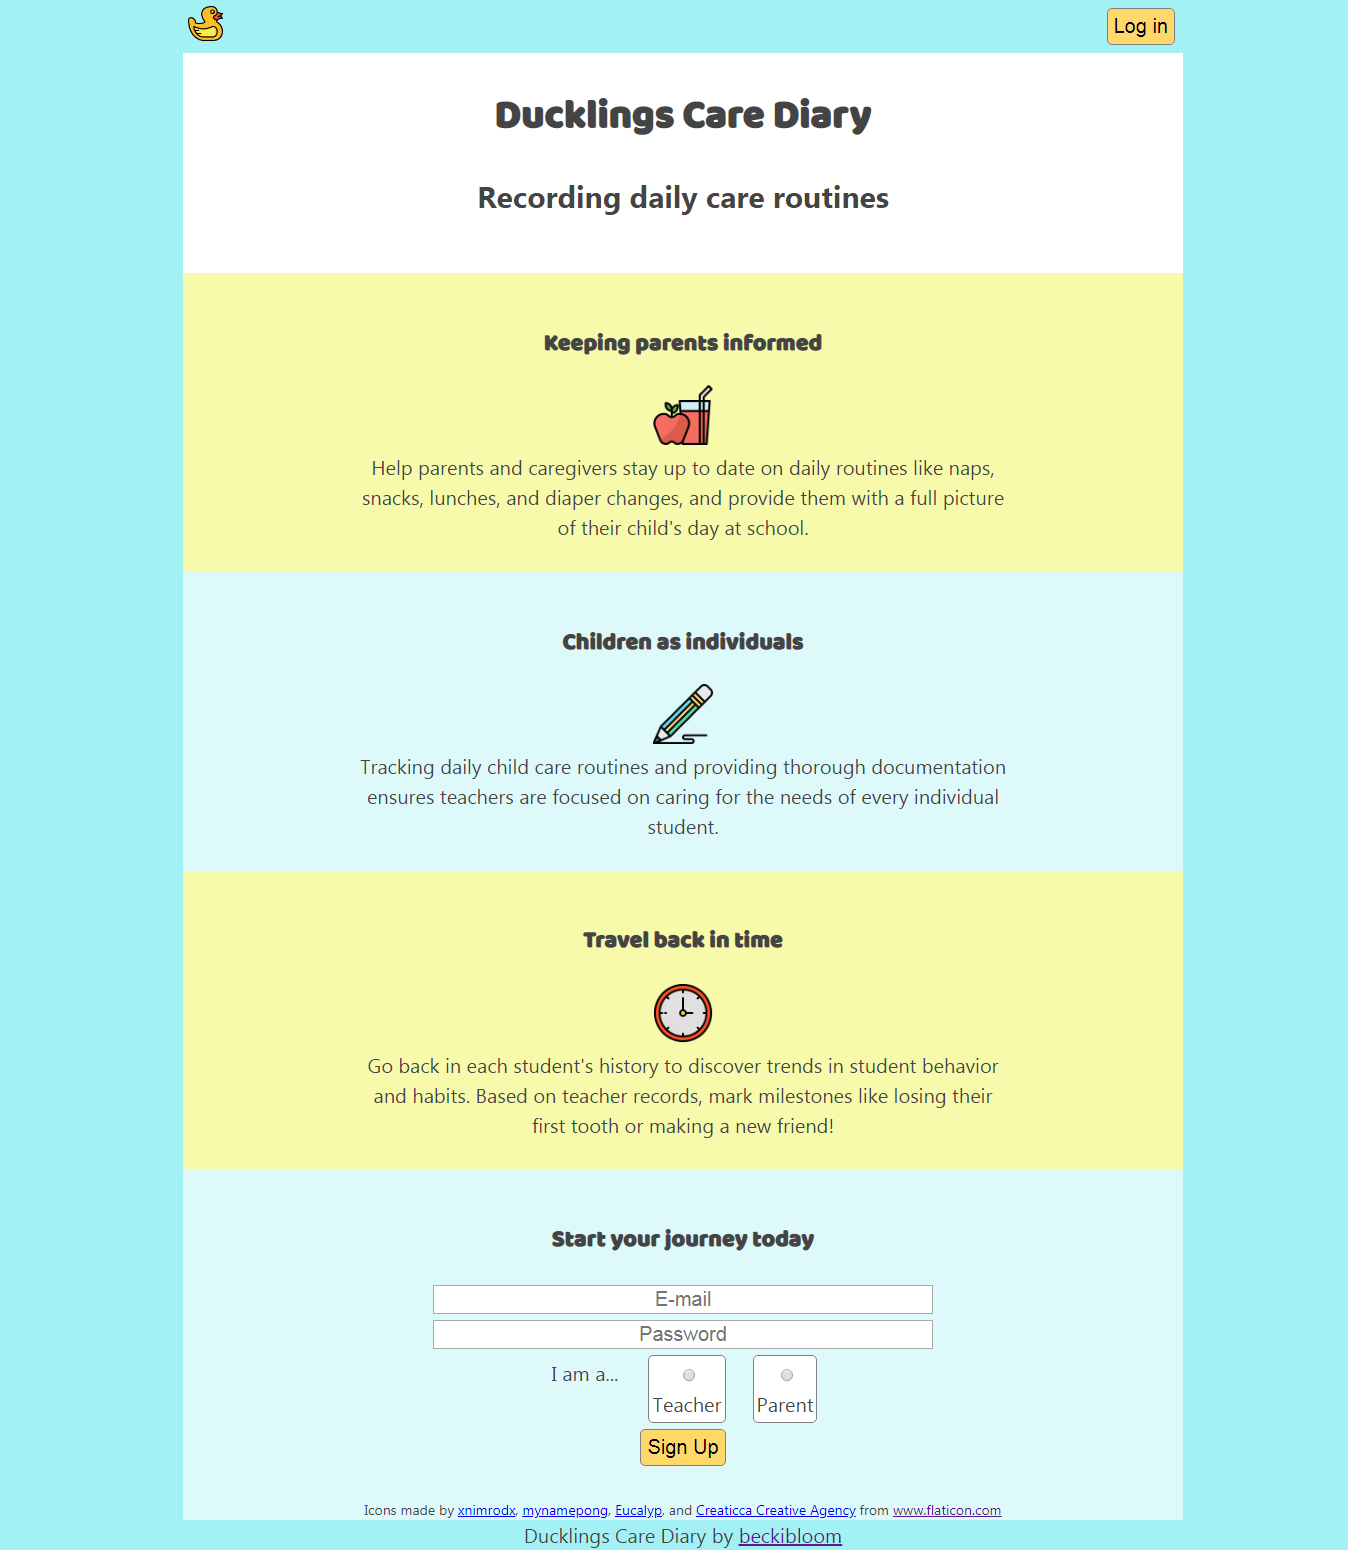 Ducklings Care Diary Landing Page